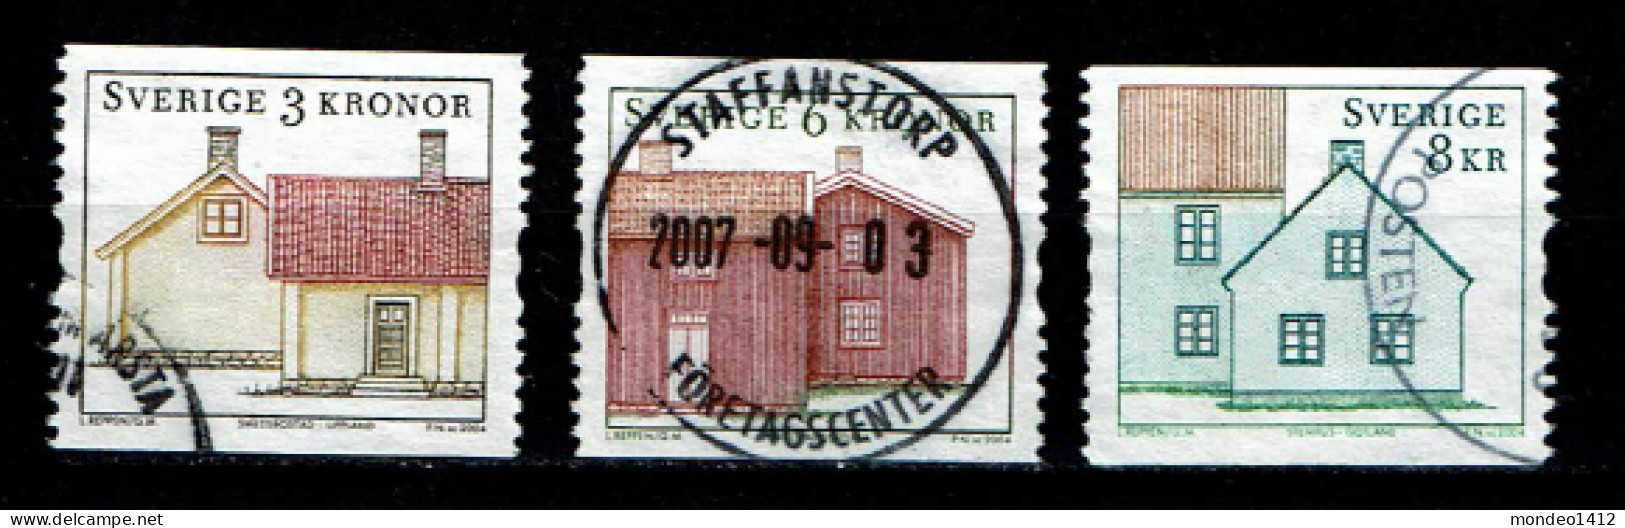 Sweden 2004 - Architecture, Maisons  - Used - Used Stamps